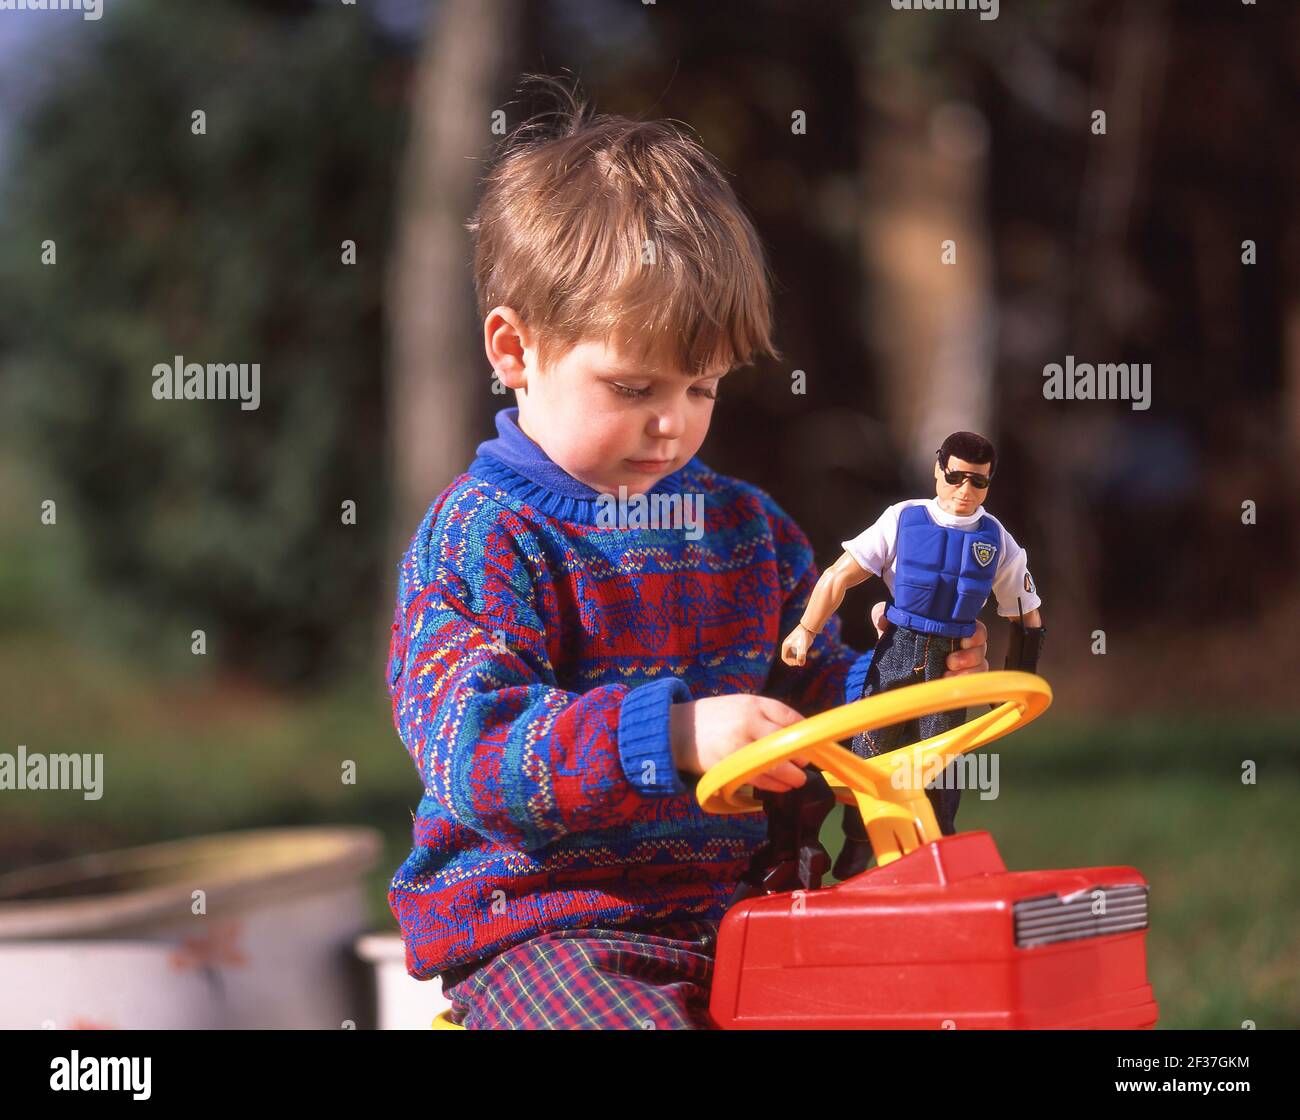 Toddler playing with Action Man toy, Winkfield, Berkshire, England, United Kingdom Stock Photo